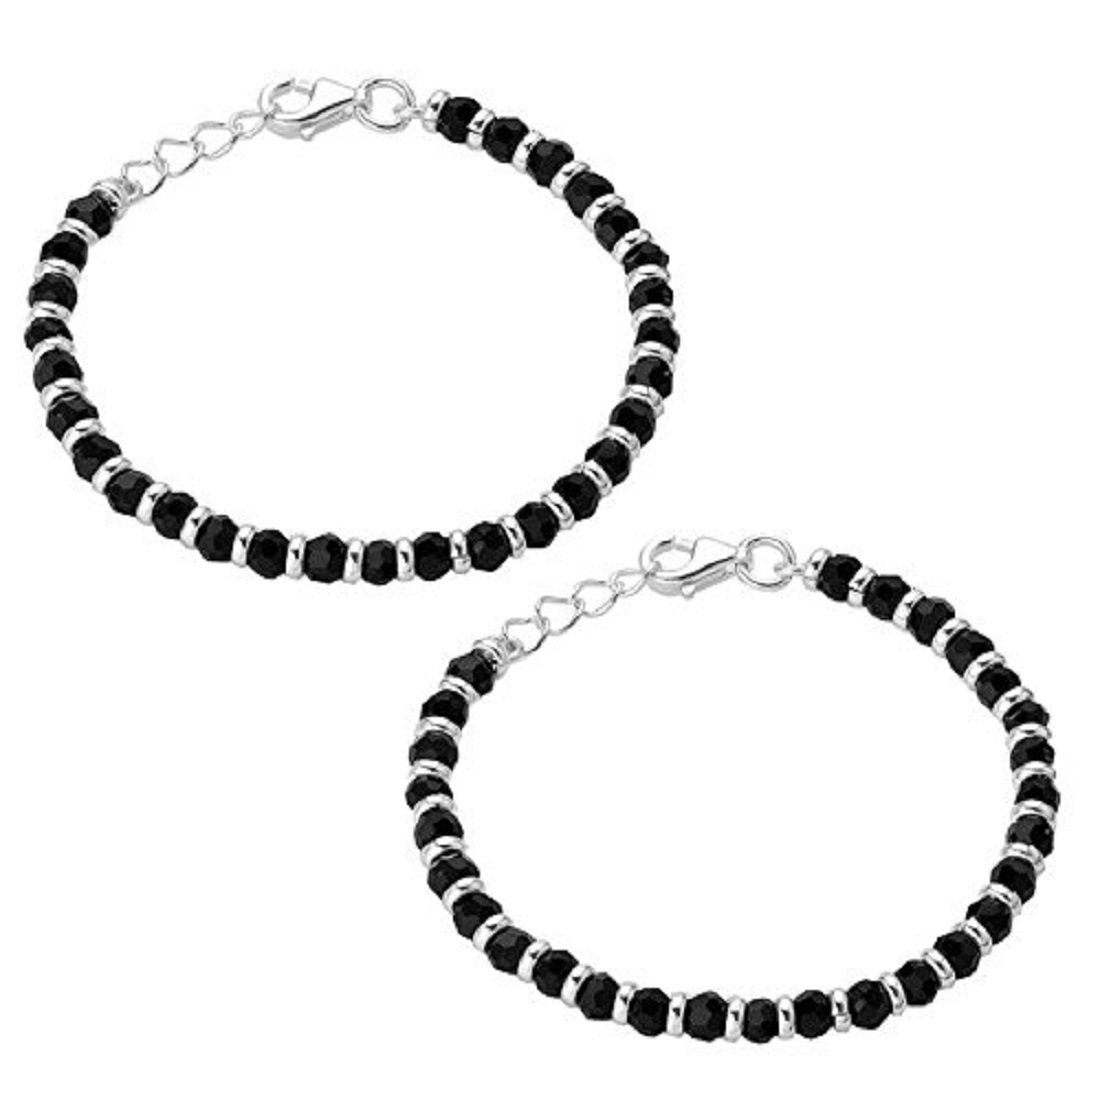 KUKSHYA 925 Traditional Silver & Black Beads Baby Nazariya in Pure 92.5% Pure Sterling Silver - One Pair, 925 Silver